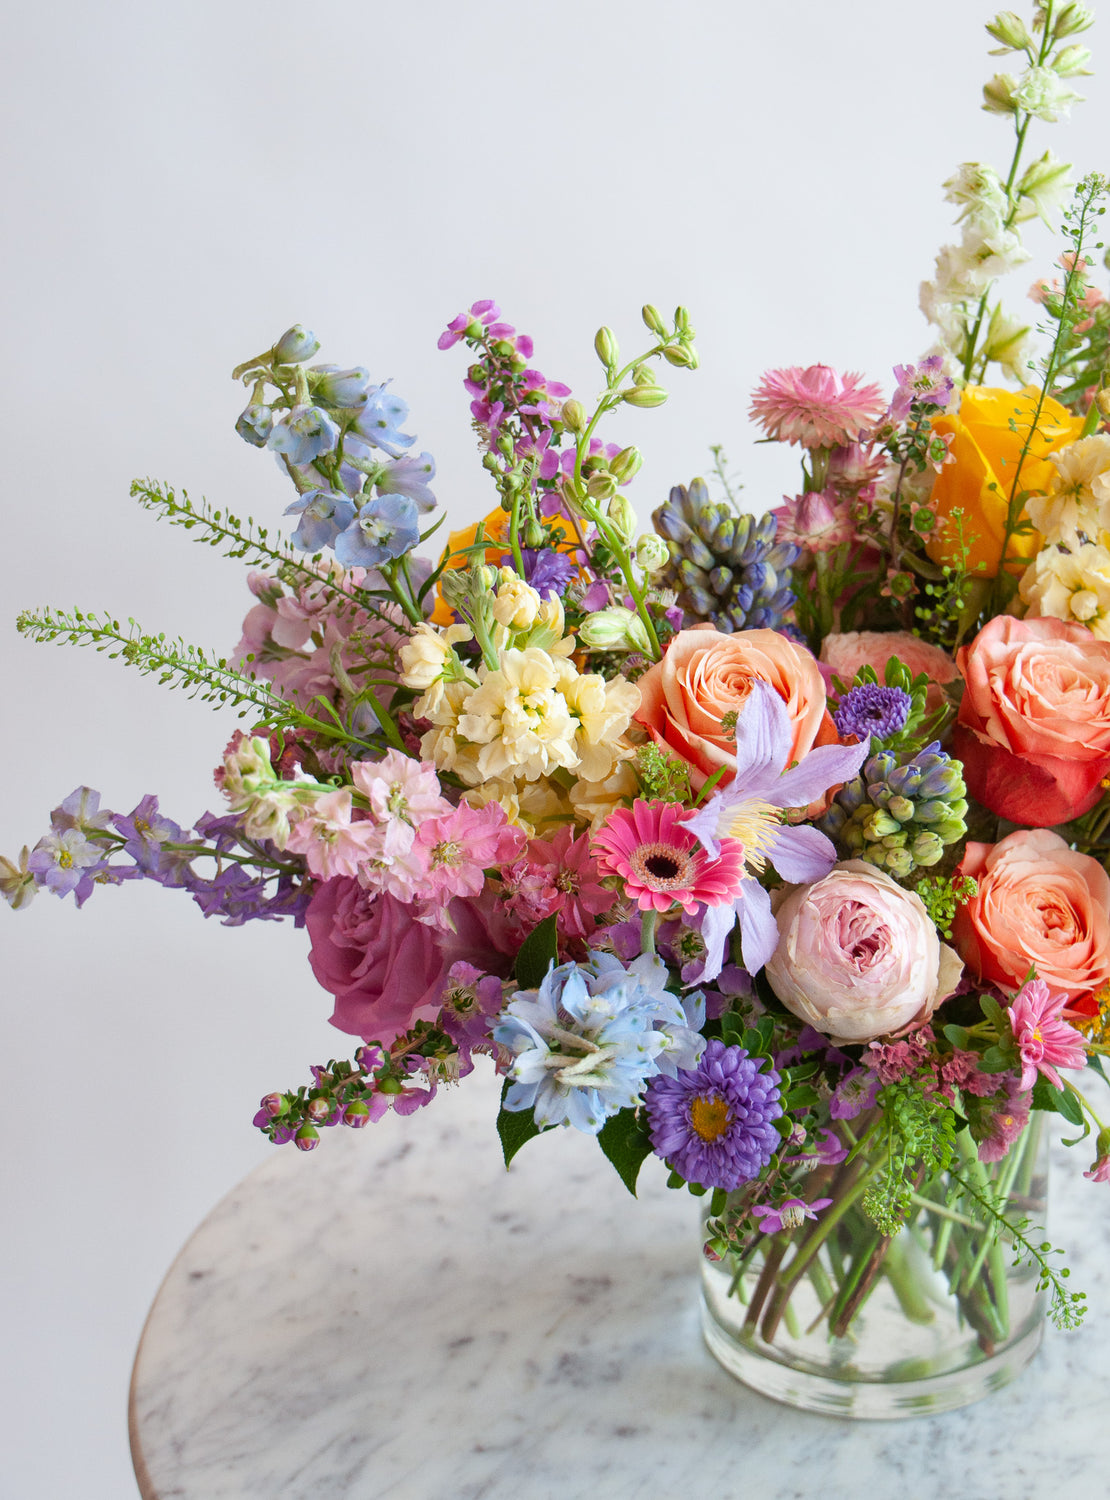 Close up of the blooms in a flower arrangement. The flowers are many colors and include roses, tulips, daisies, snapdragon, clematis, stock, straw flower, and delphinium.